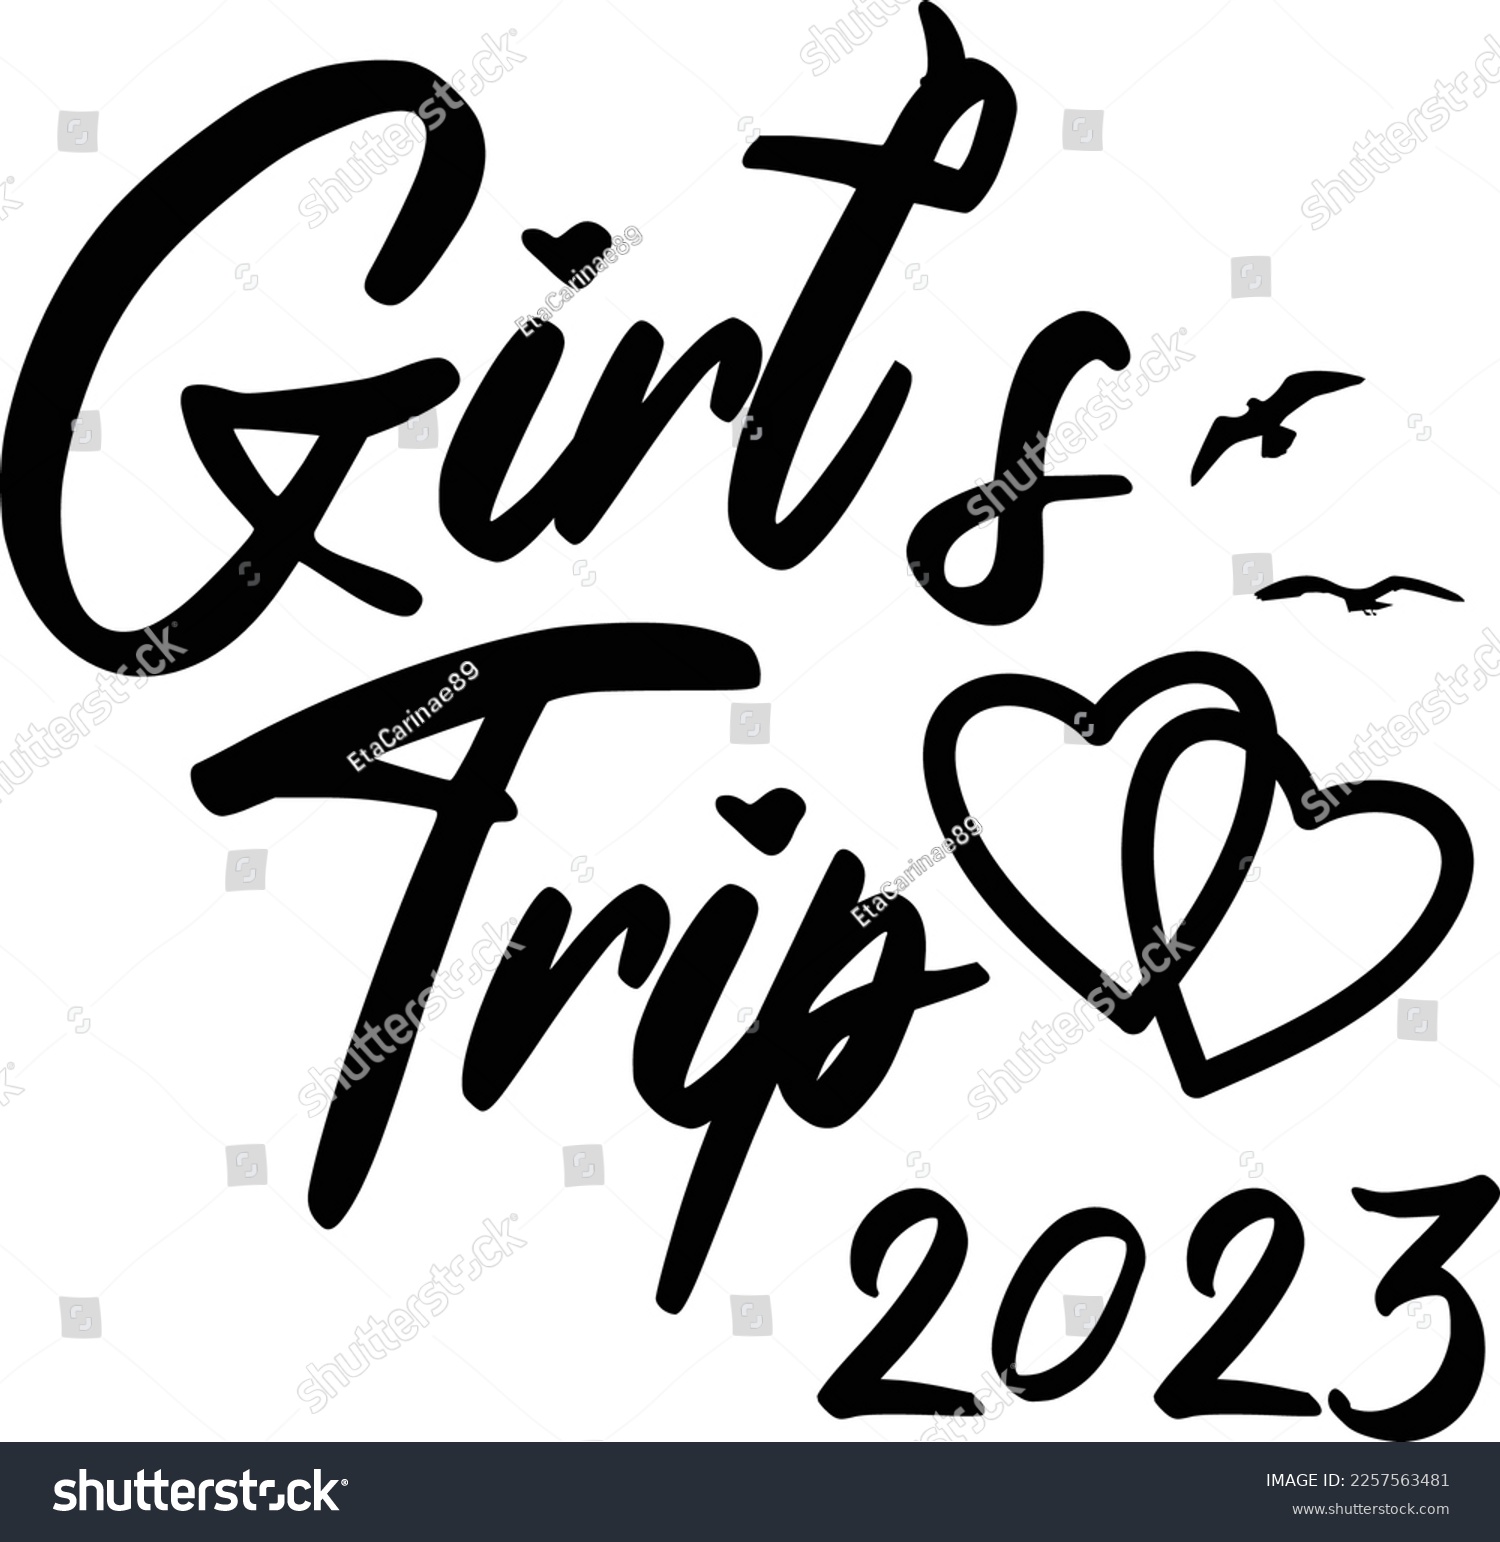 SVG of Girl's trip 2023 Clipart, Girl's trip 2023 svg